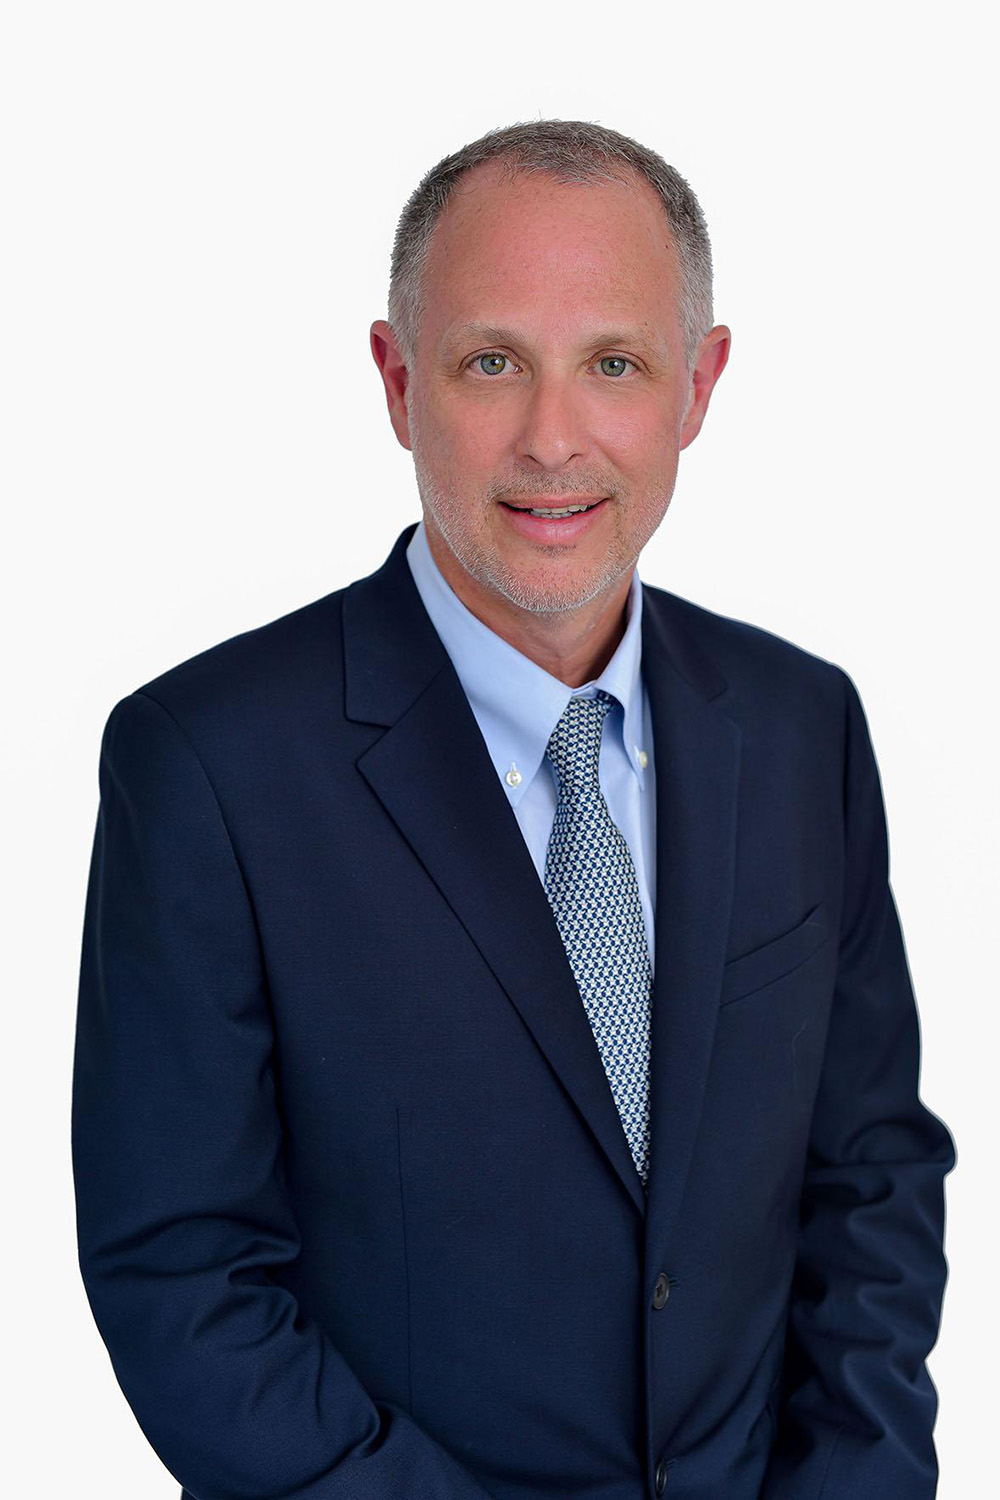 Jeff Roth, Vice President, Chief Operating Officer and Treasurer